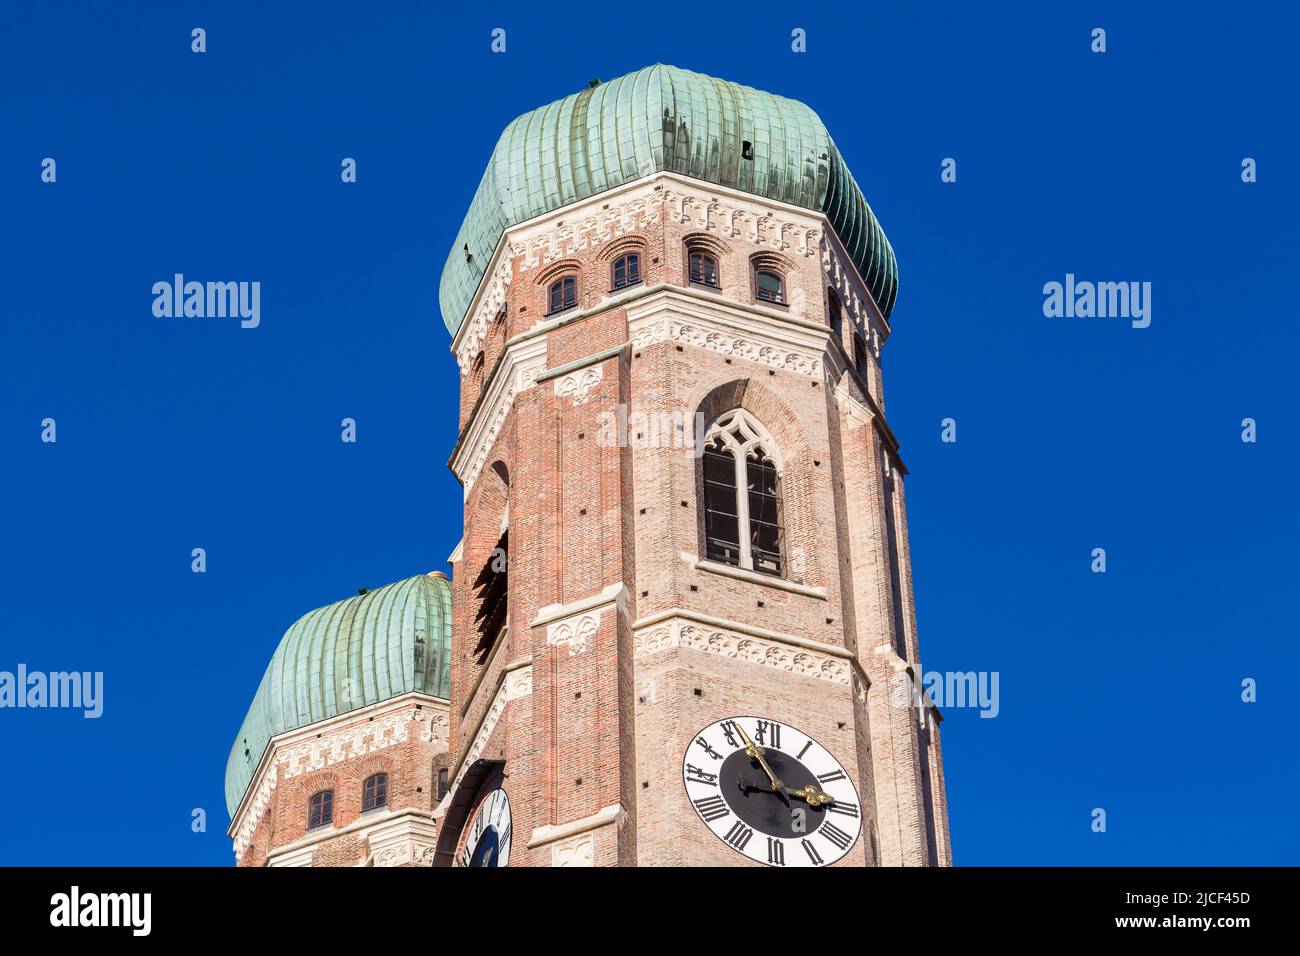 Munich, Germany - Jan 14, 2022: Close up of a steeple of the cathedral of our dear lady. Most famous church in Munich. Stock Photo